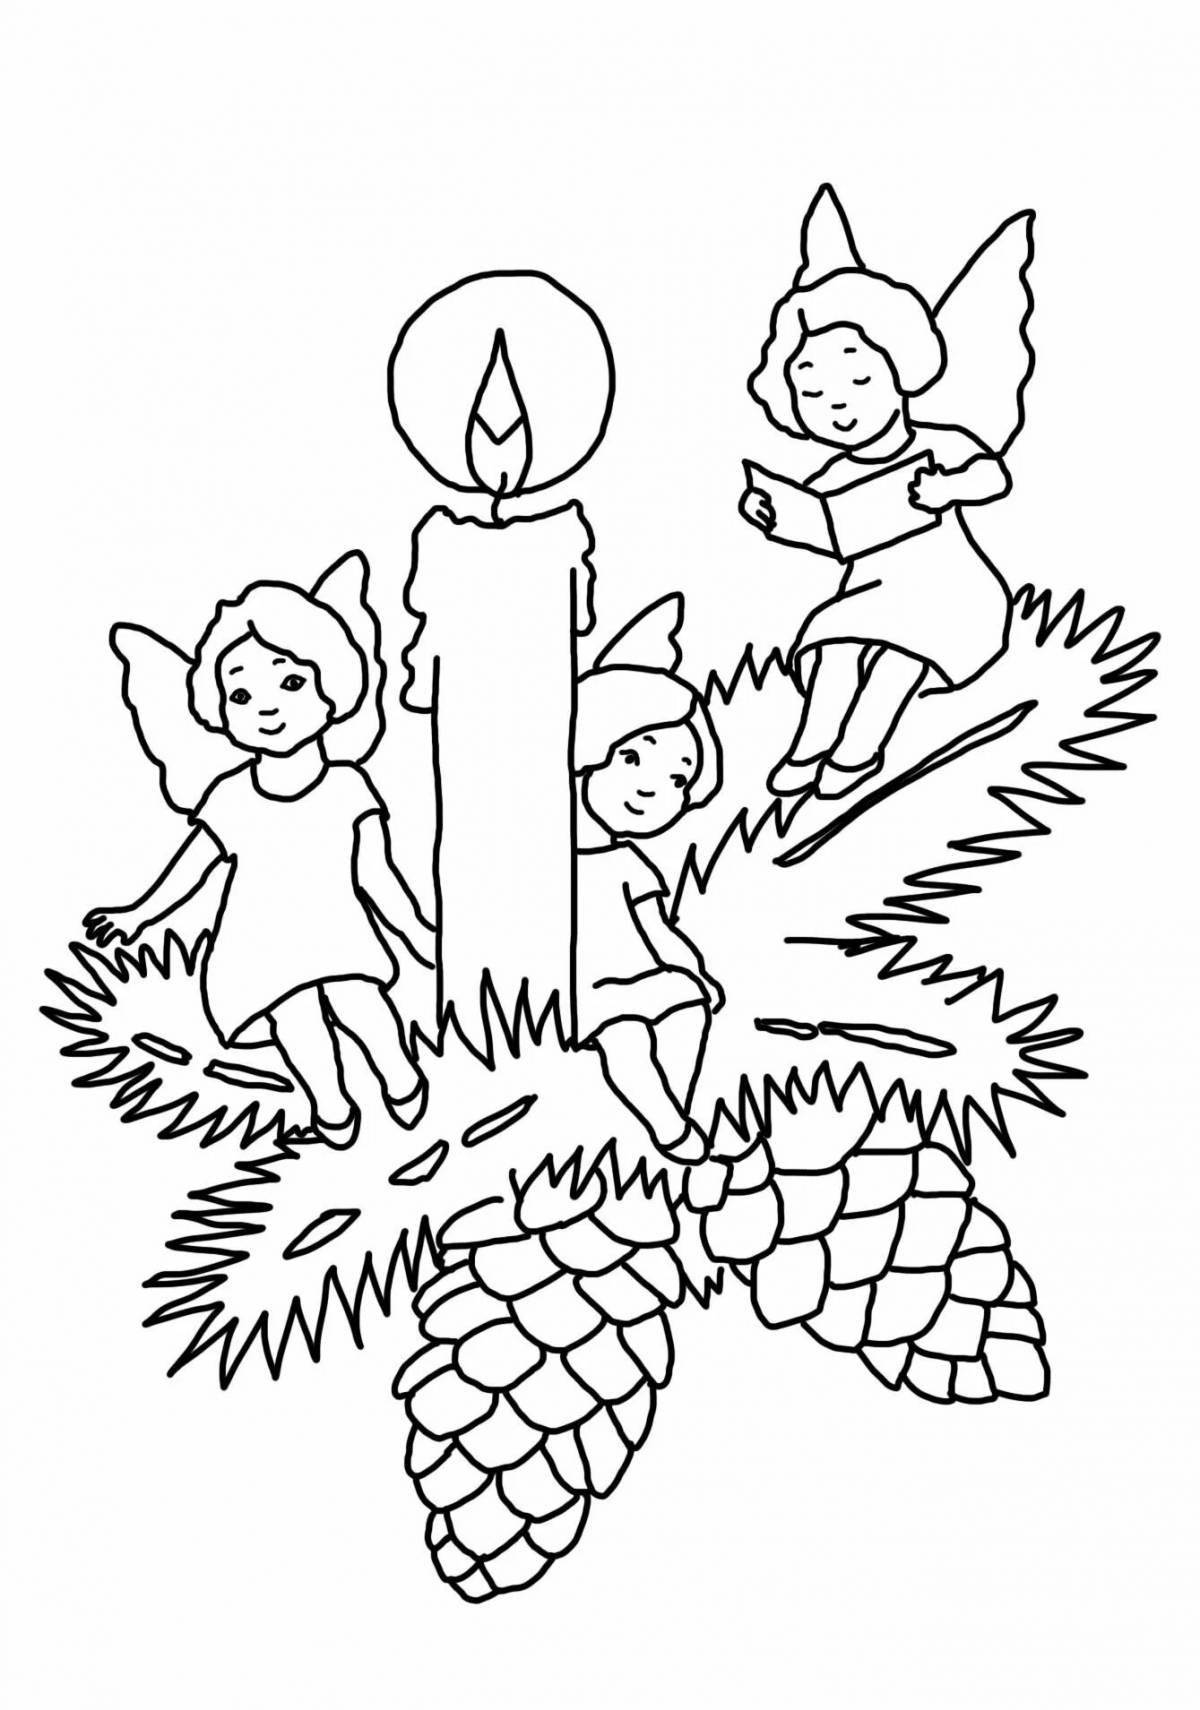 Animated Christmas coloring book for children 5-6 years old